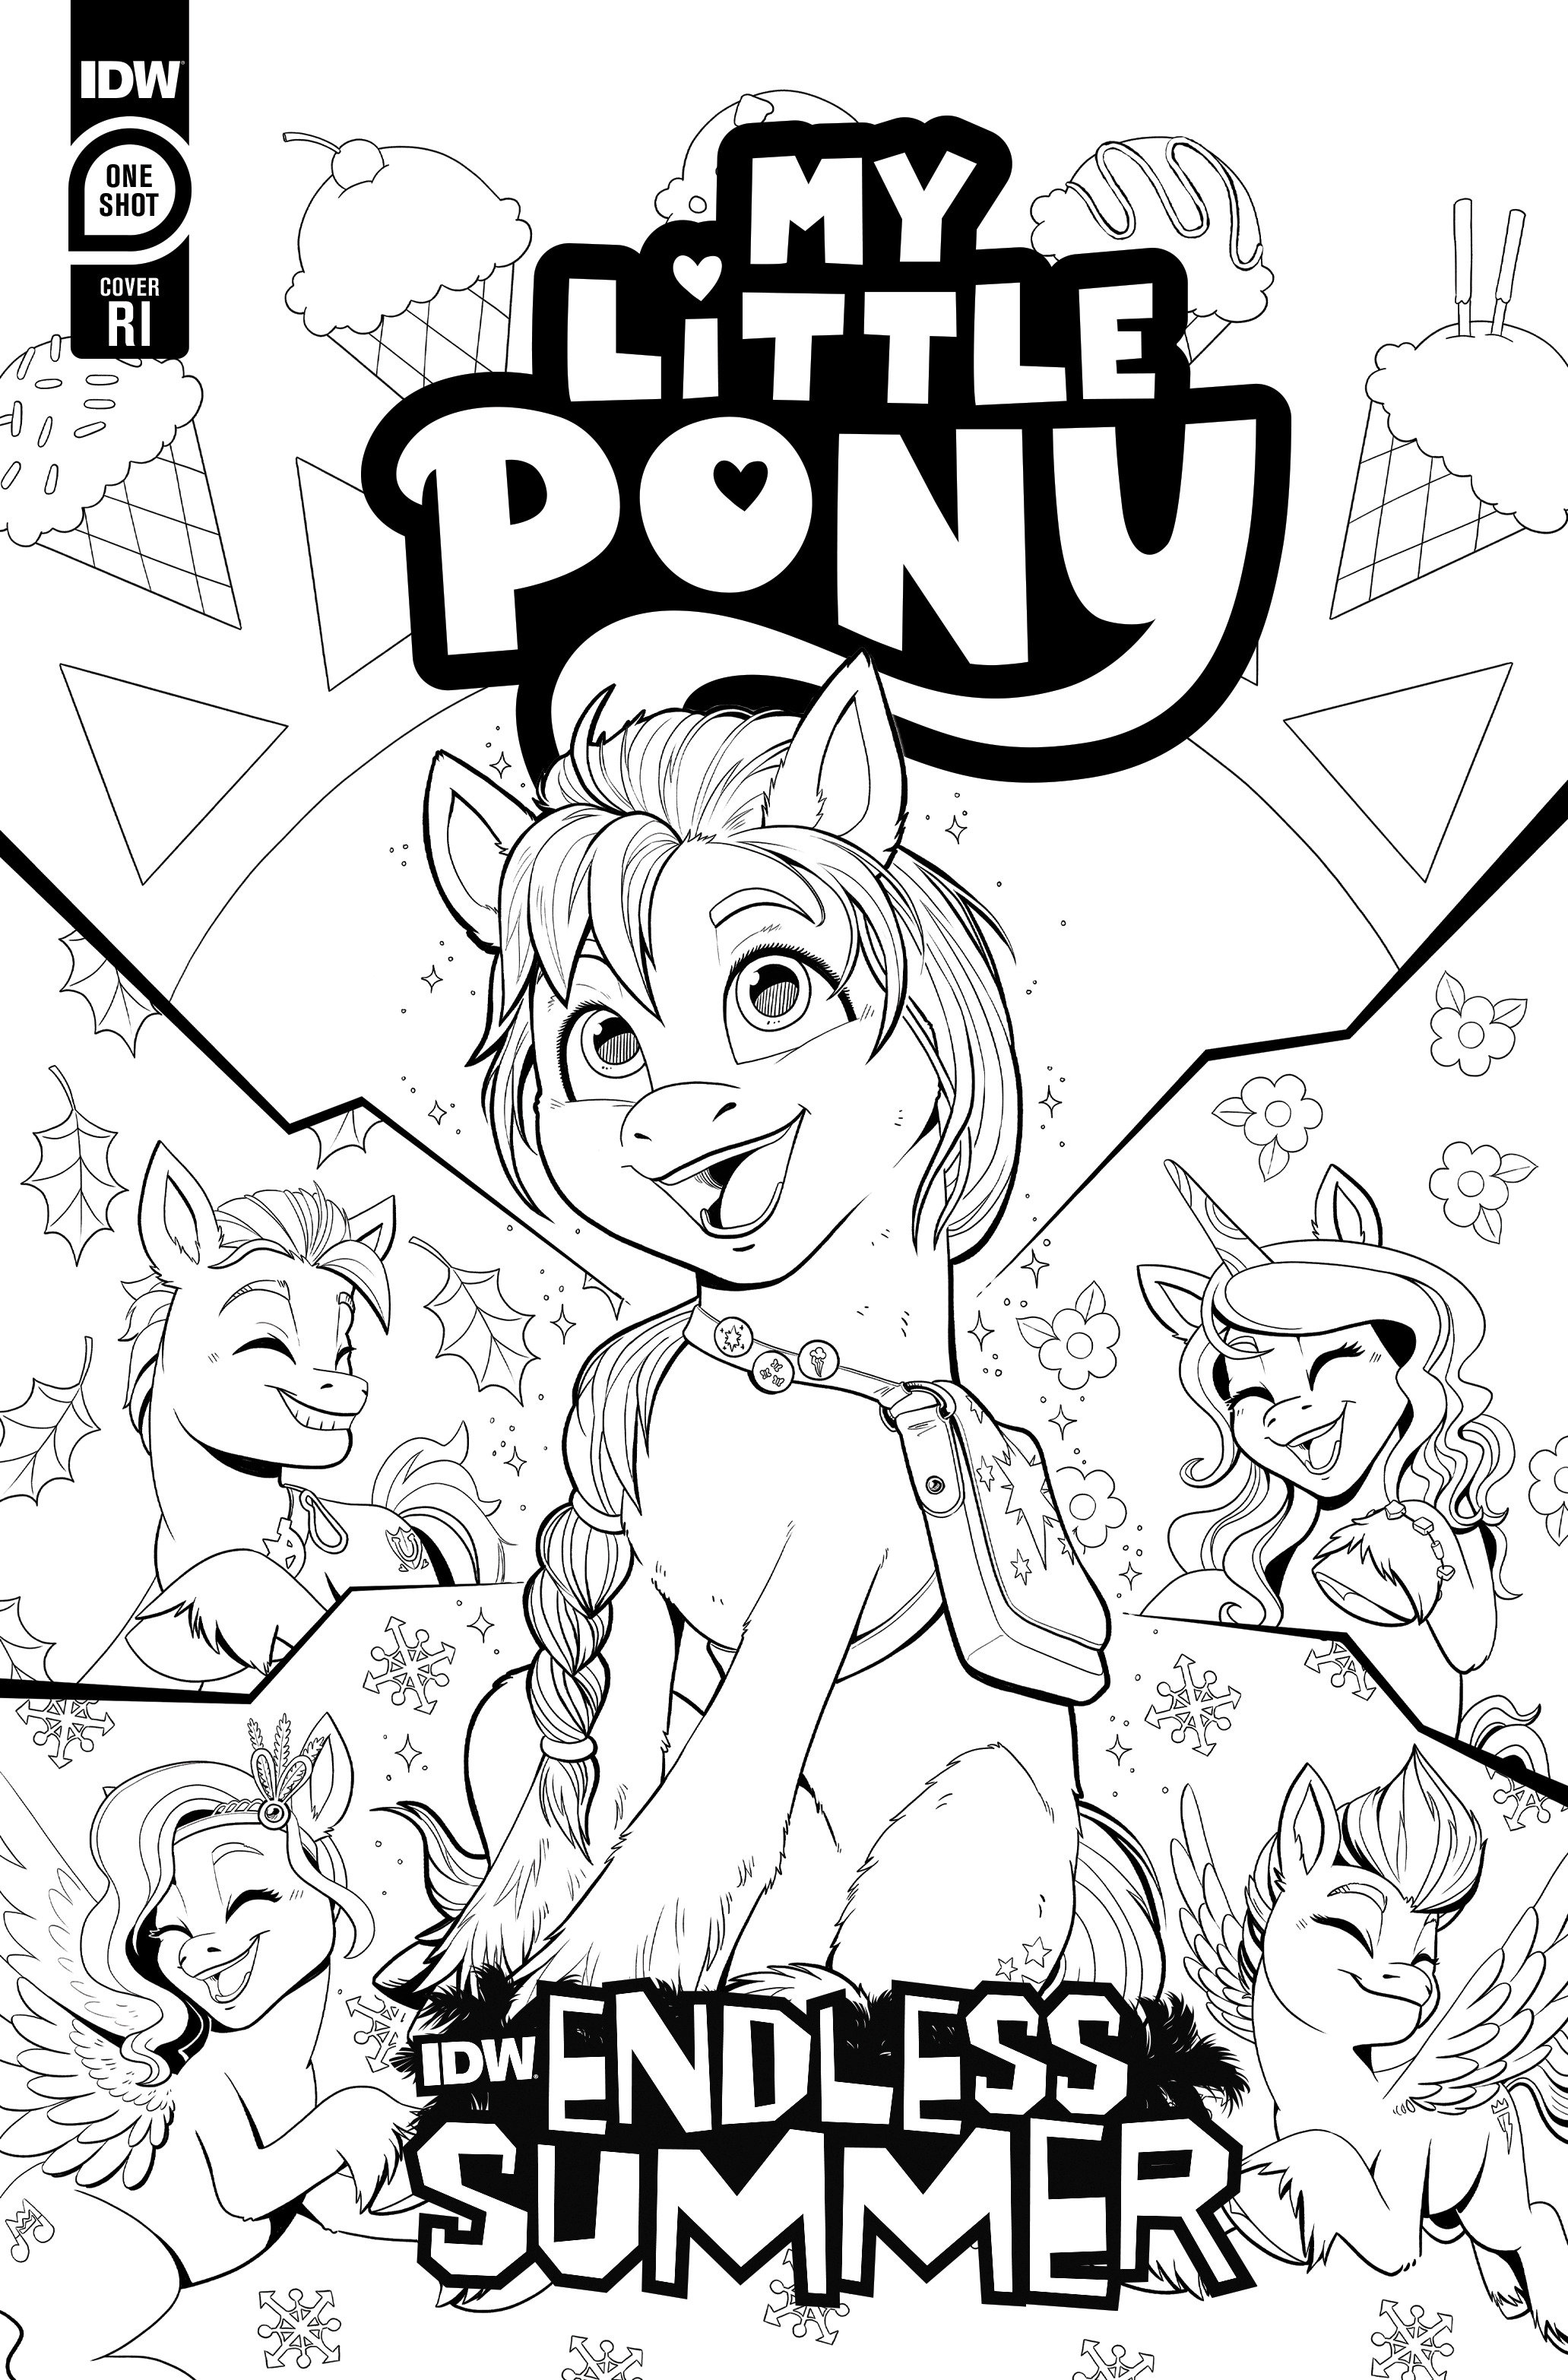 IDW Endless Summer—My Little Pony Cover Retailer Incentive Coloring Book Variant 1 for 10 Incentive Variant